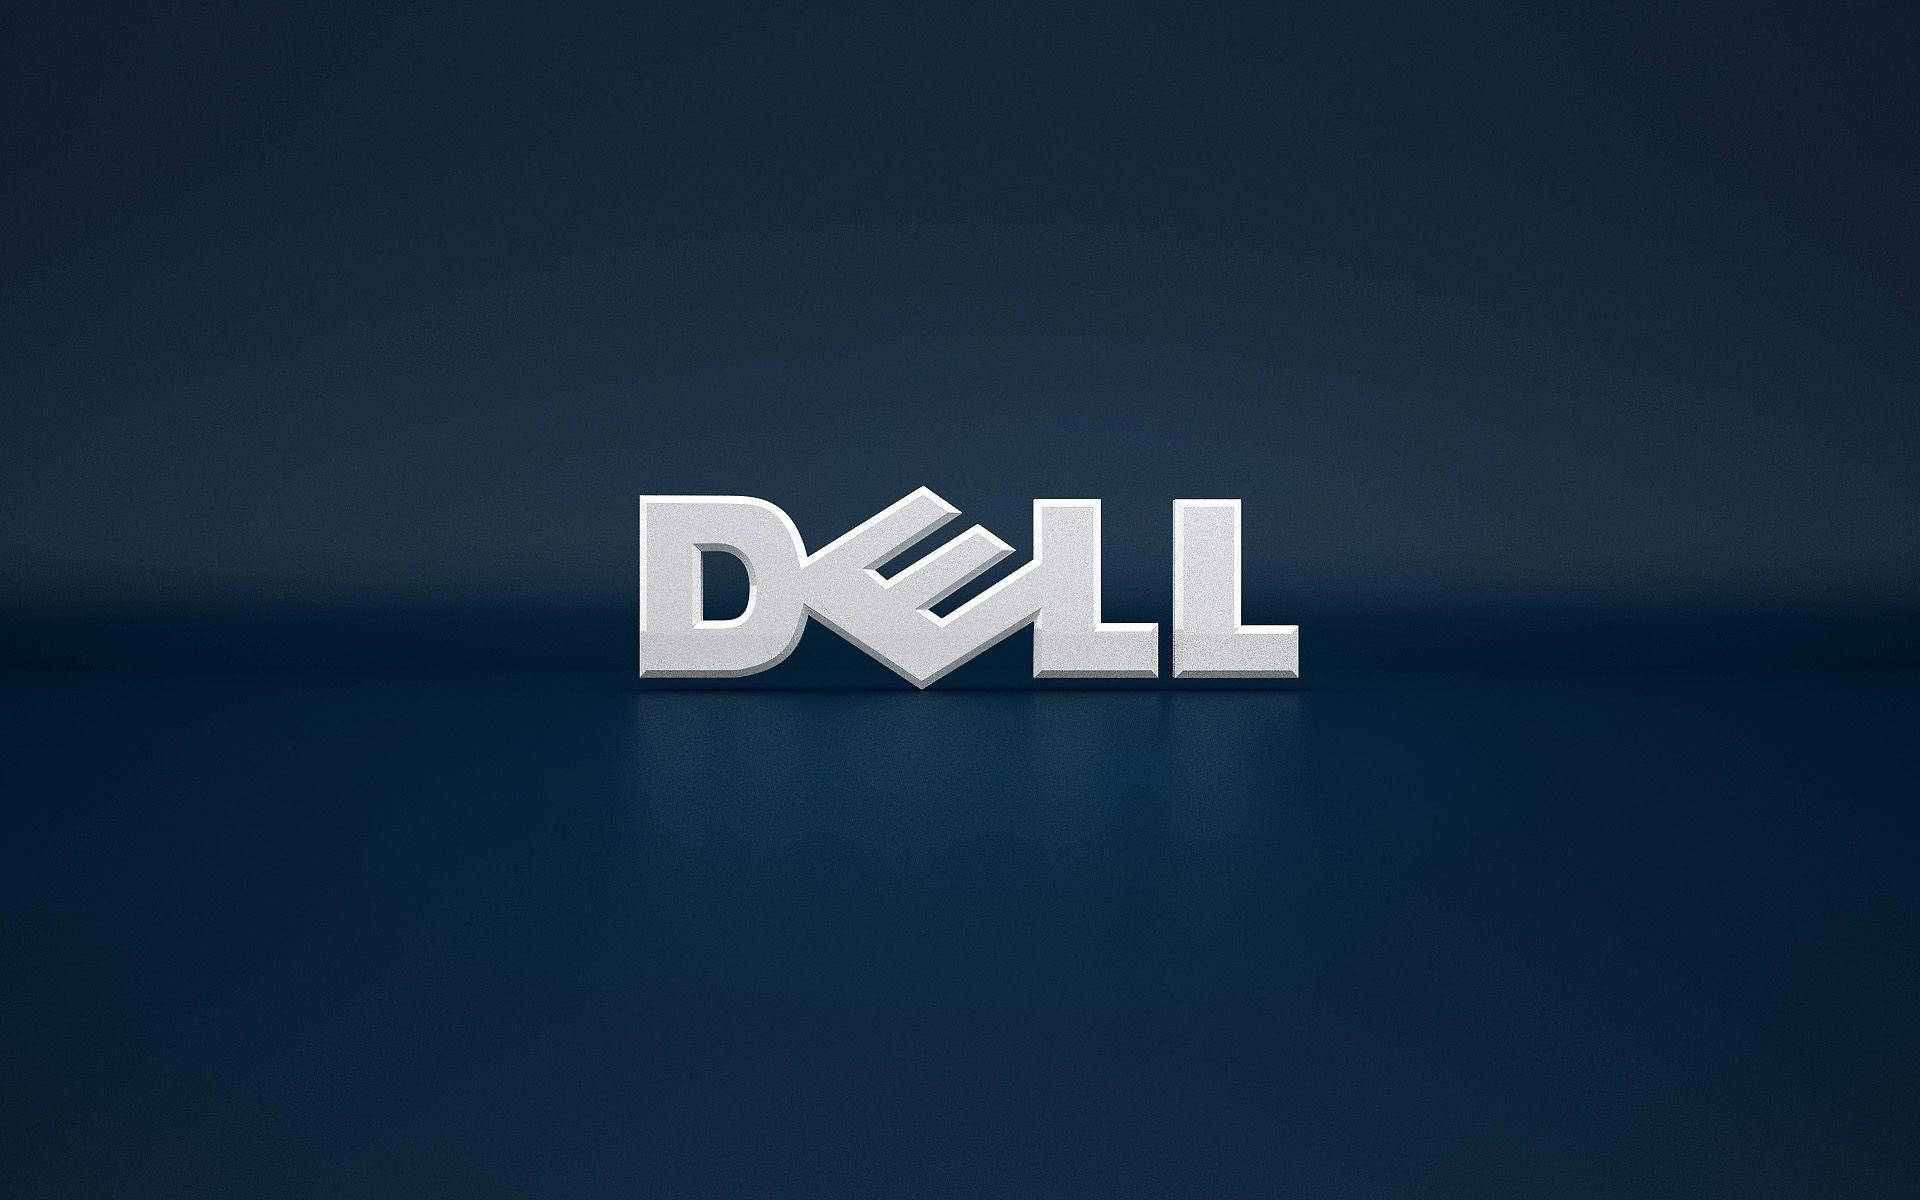 Blue And White Dell Logo Background